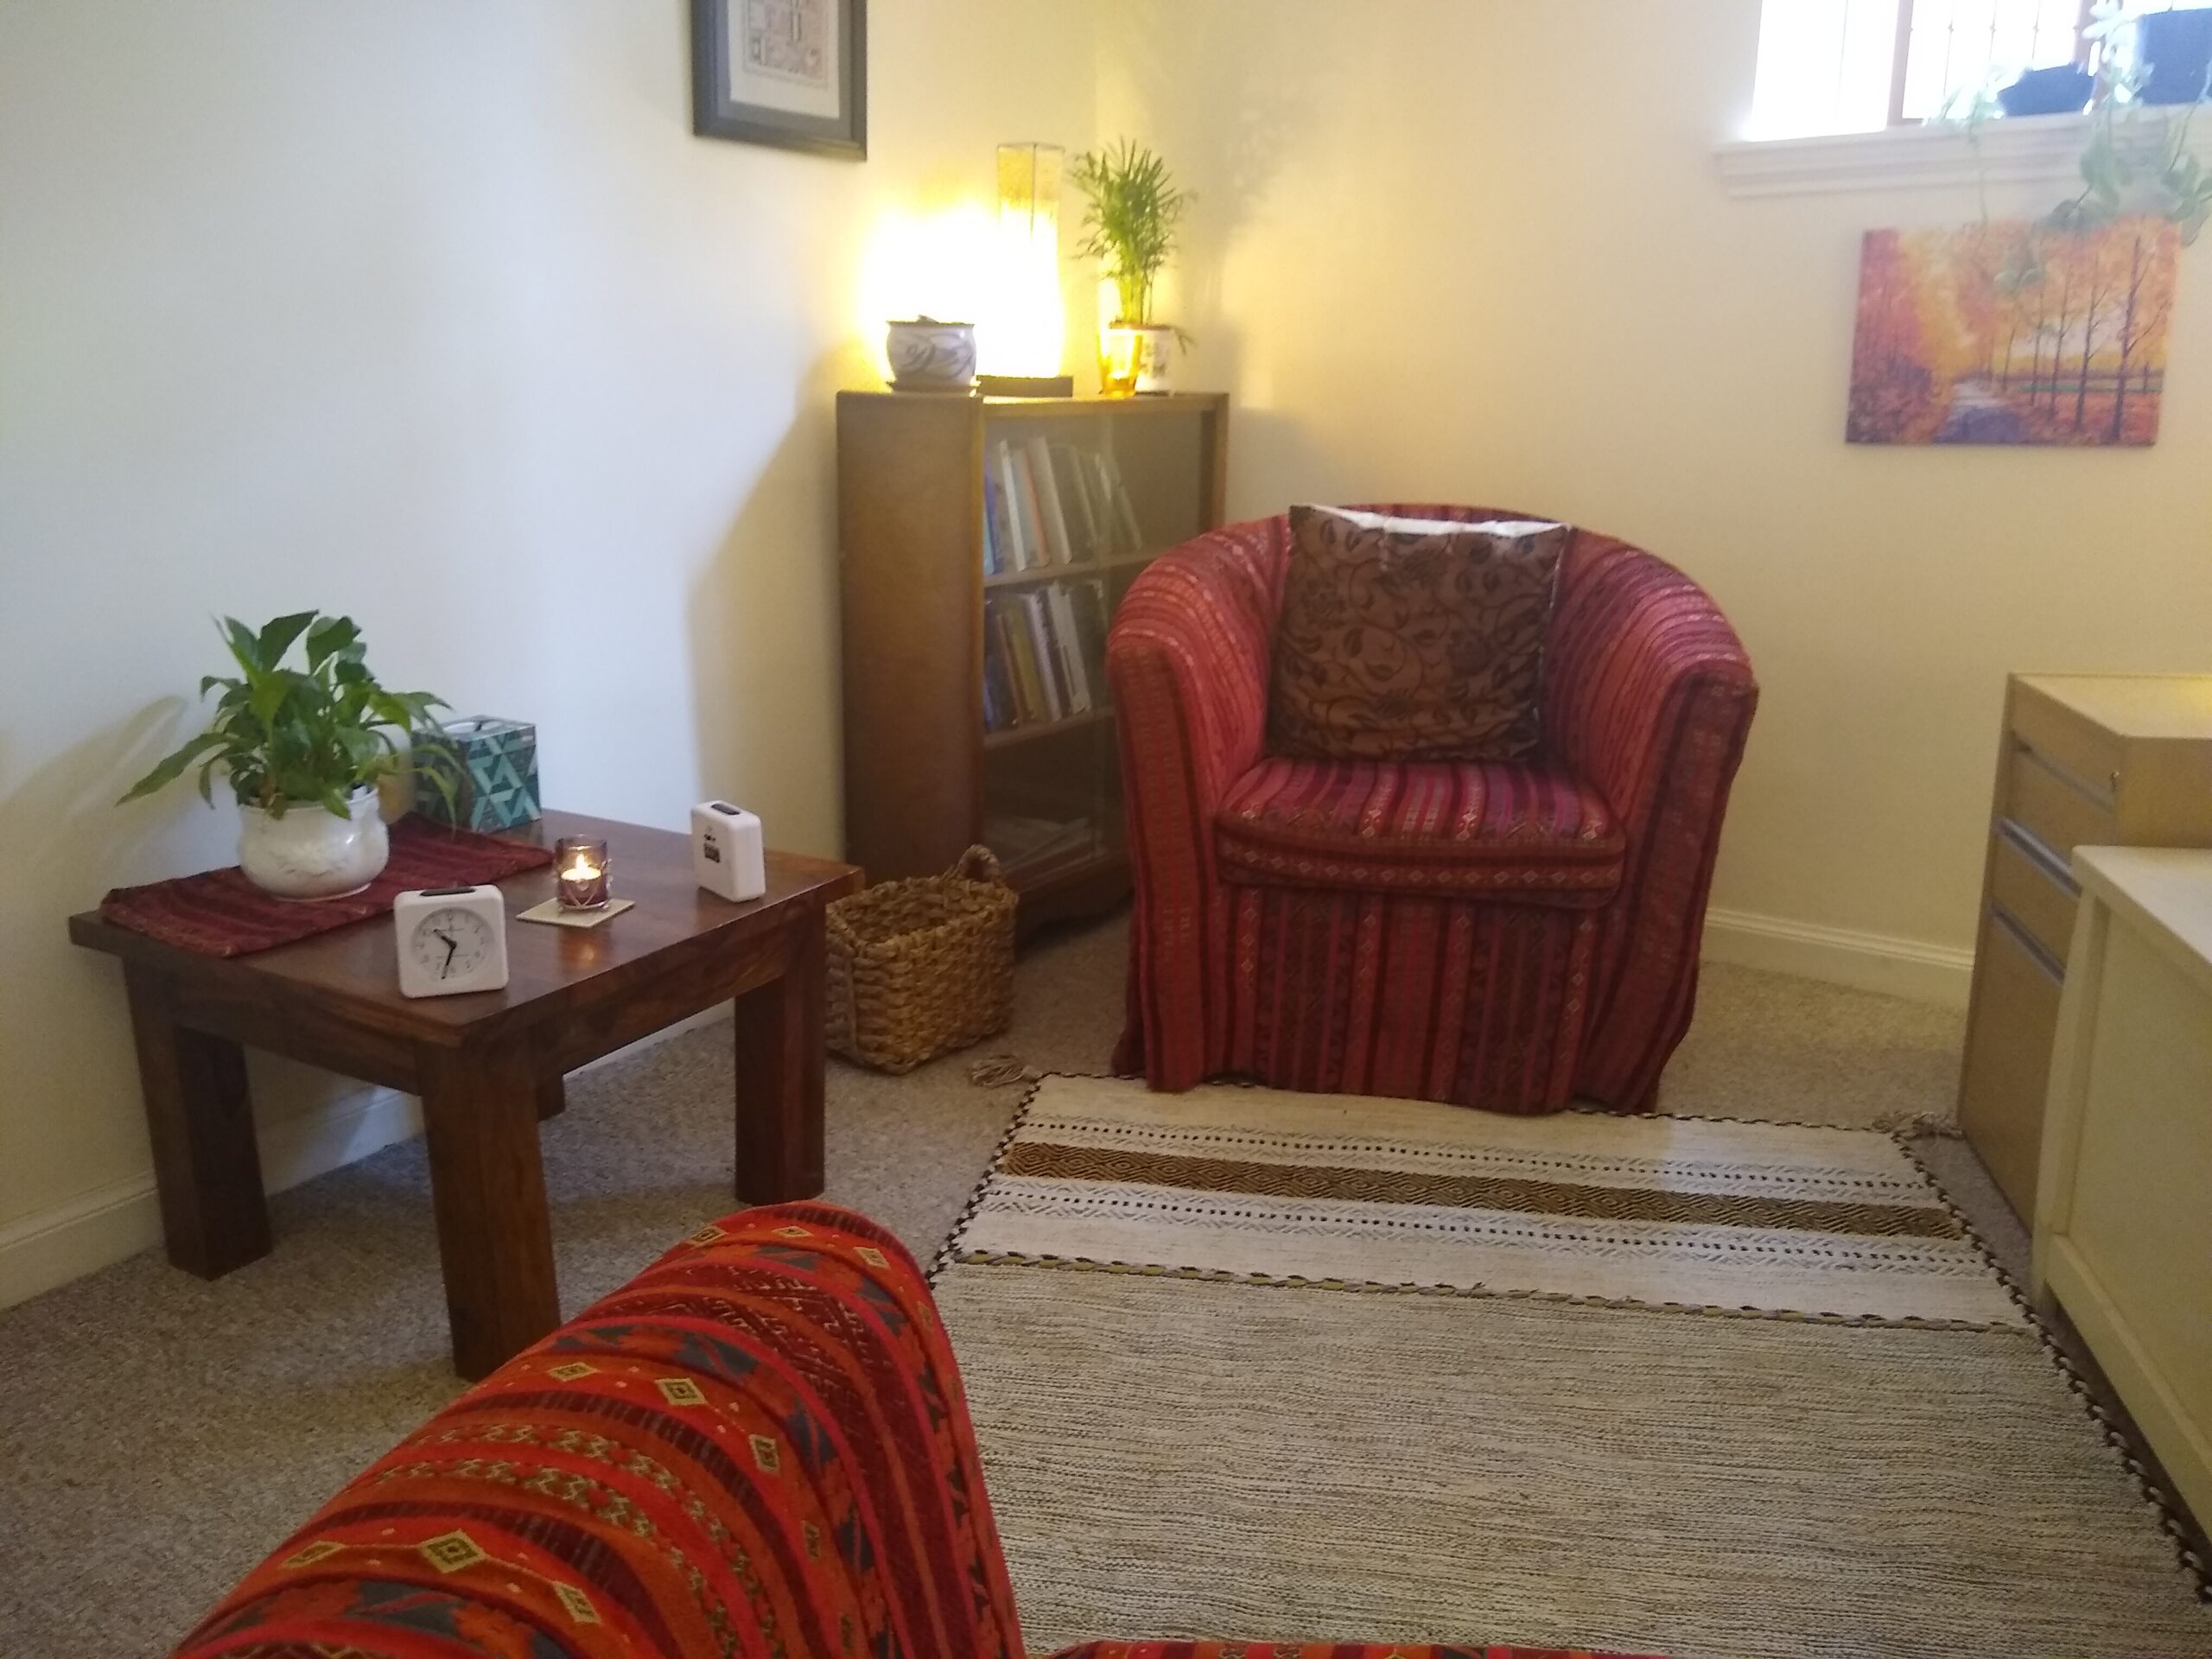 Counselling room with two armchairs